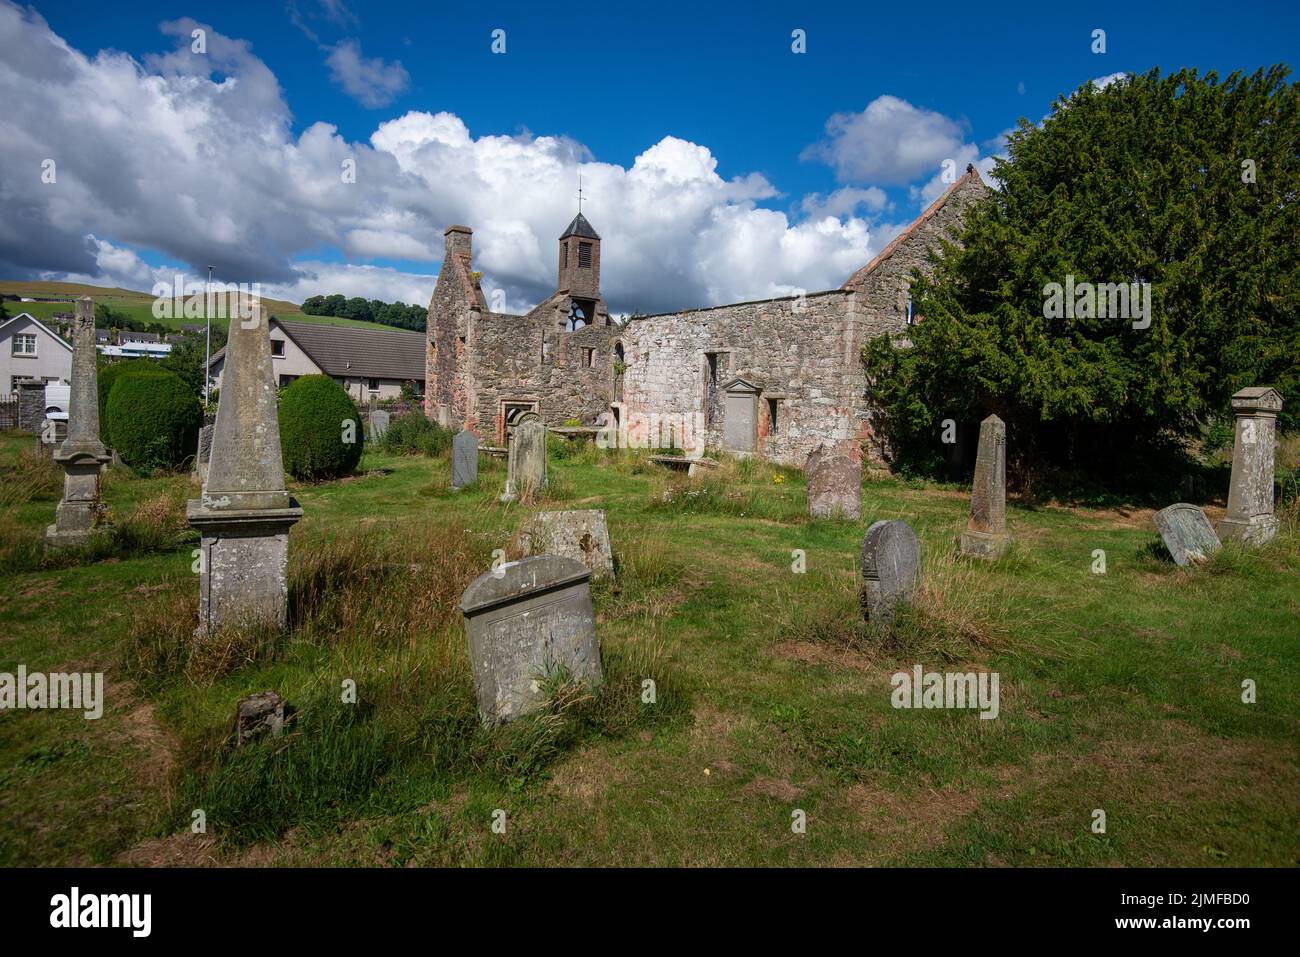 The ruins of St. Mary of Wedale Church, Stow, Selkirkshire, Scottish Borders, Scotland, UK. Stock Photo